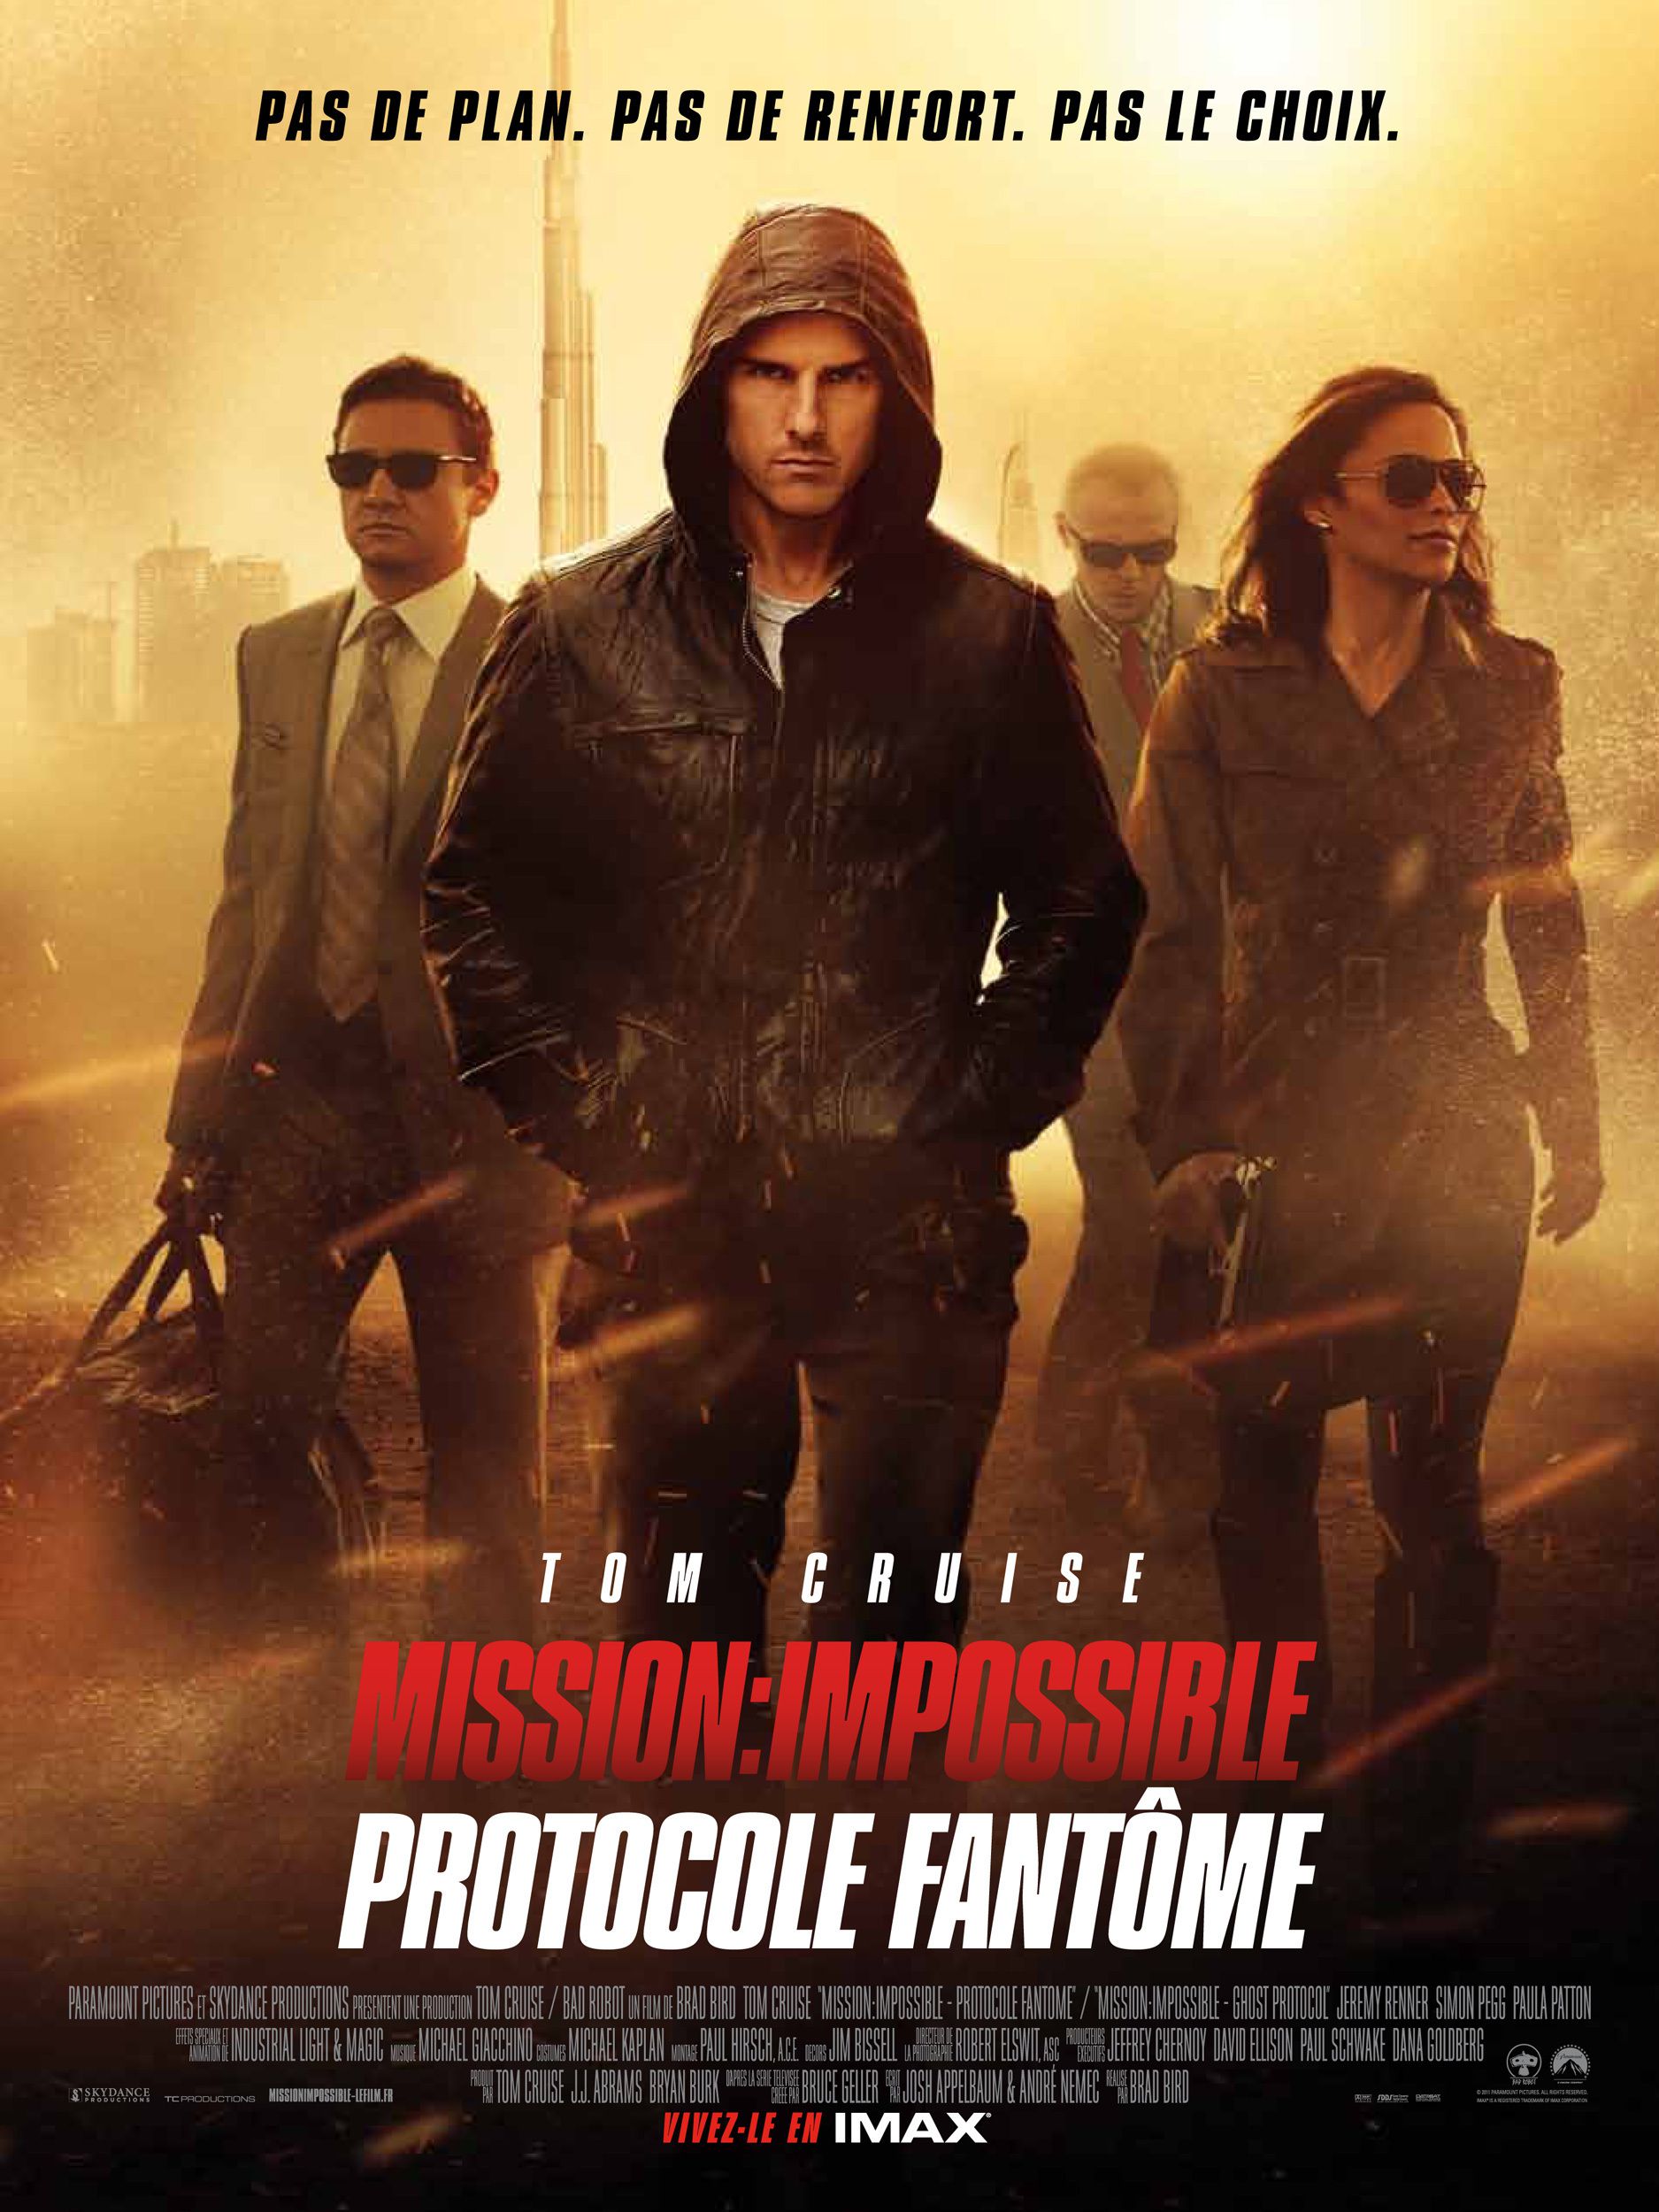 Mission : Impossible - Protocole fantôme - Film (2011) streaming VF gratuit complet